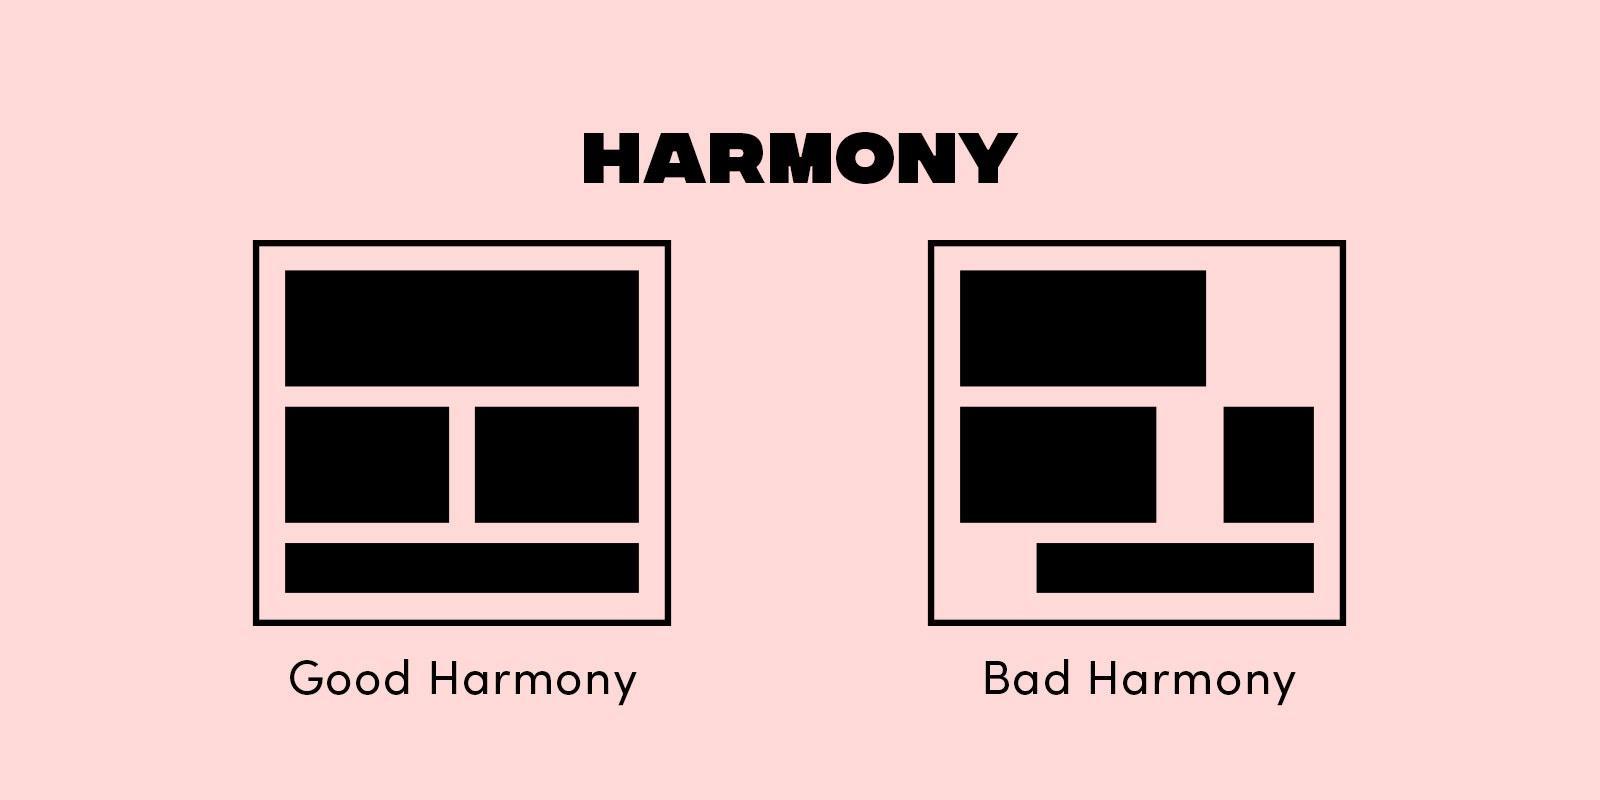 Harmony example in white space